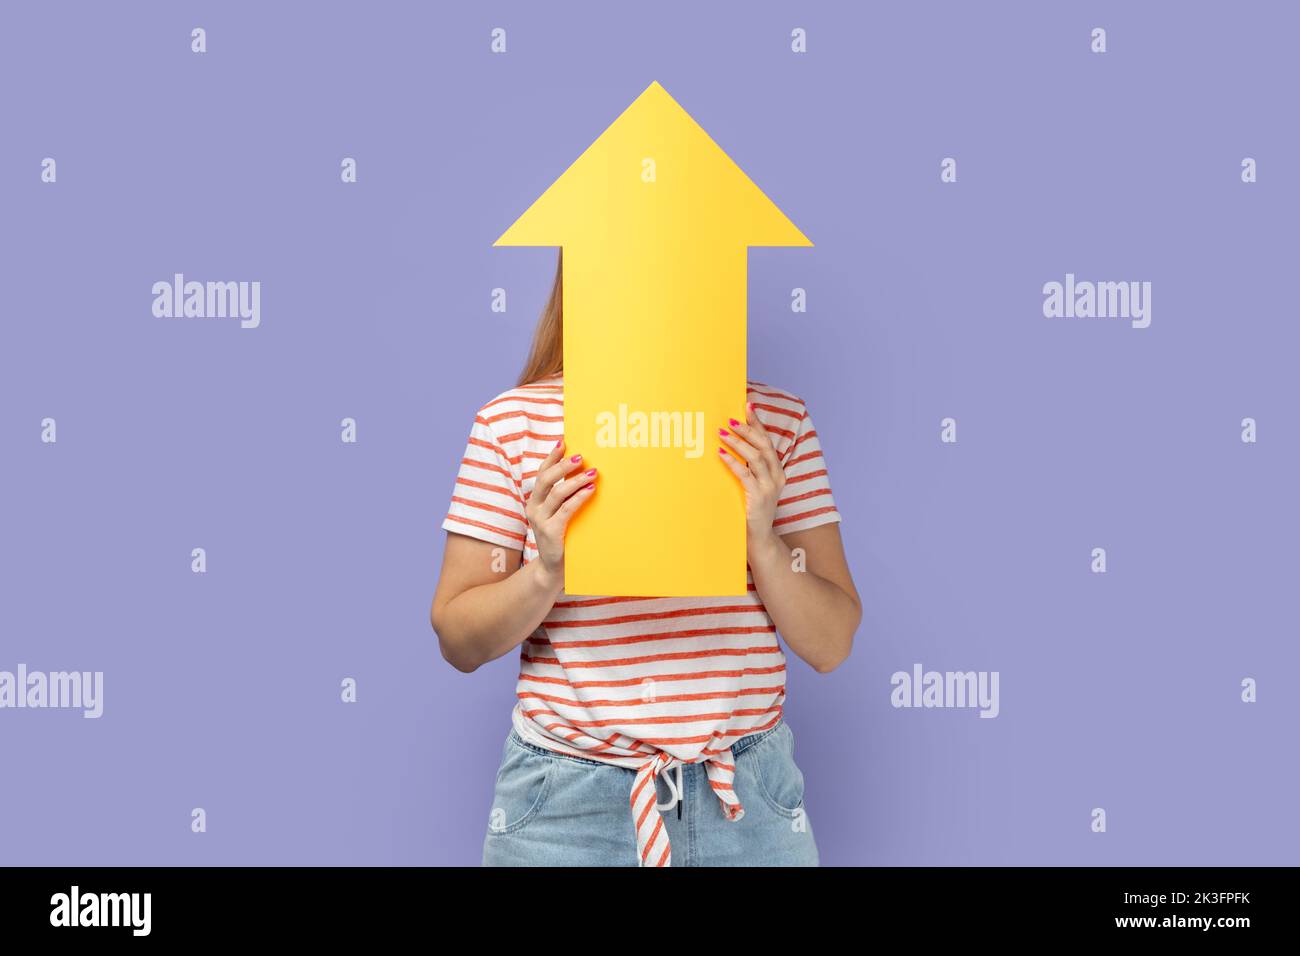 Portrait of anonymous unknown blond woman wearing striped T-shirt holding big yellow arrow pointing up, showing increase in career. Indoor studio shot isolated on purple background. Stock Photo